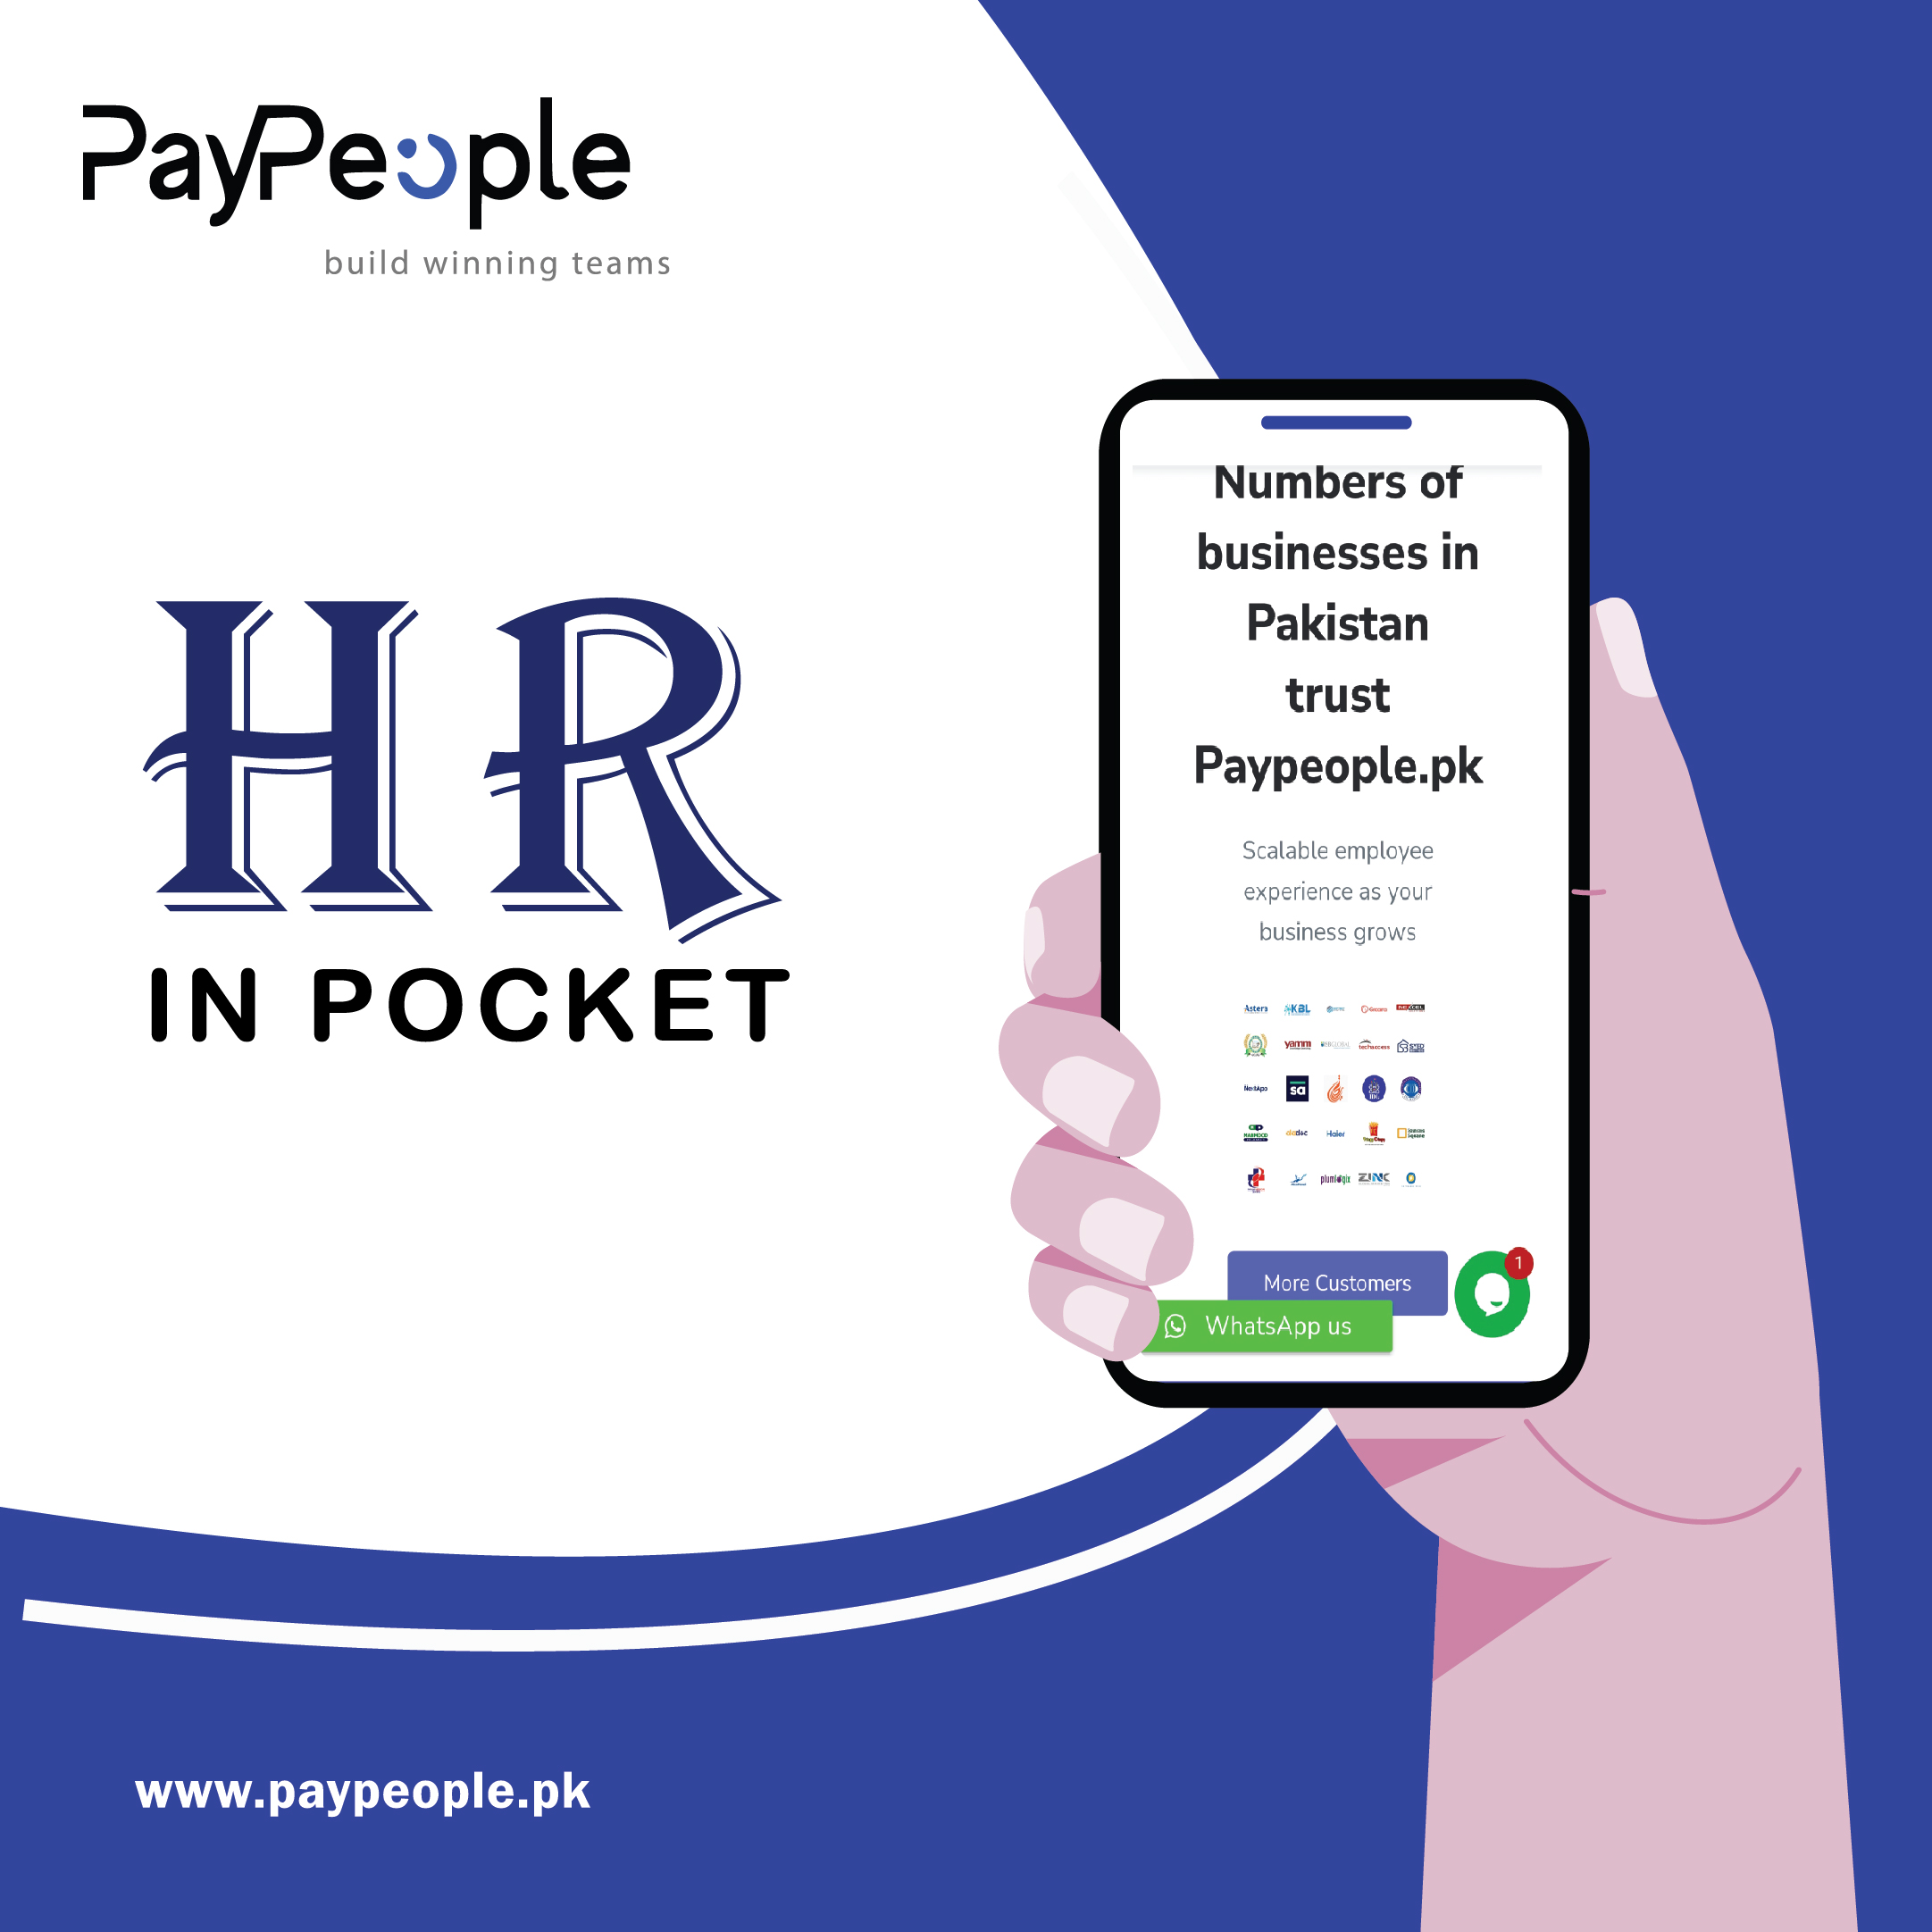 What are the key features of HR Software in Pakistan available?